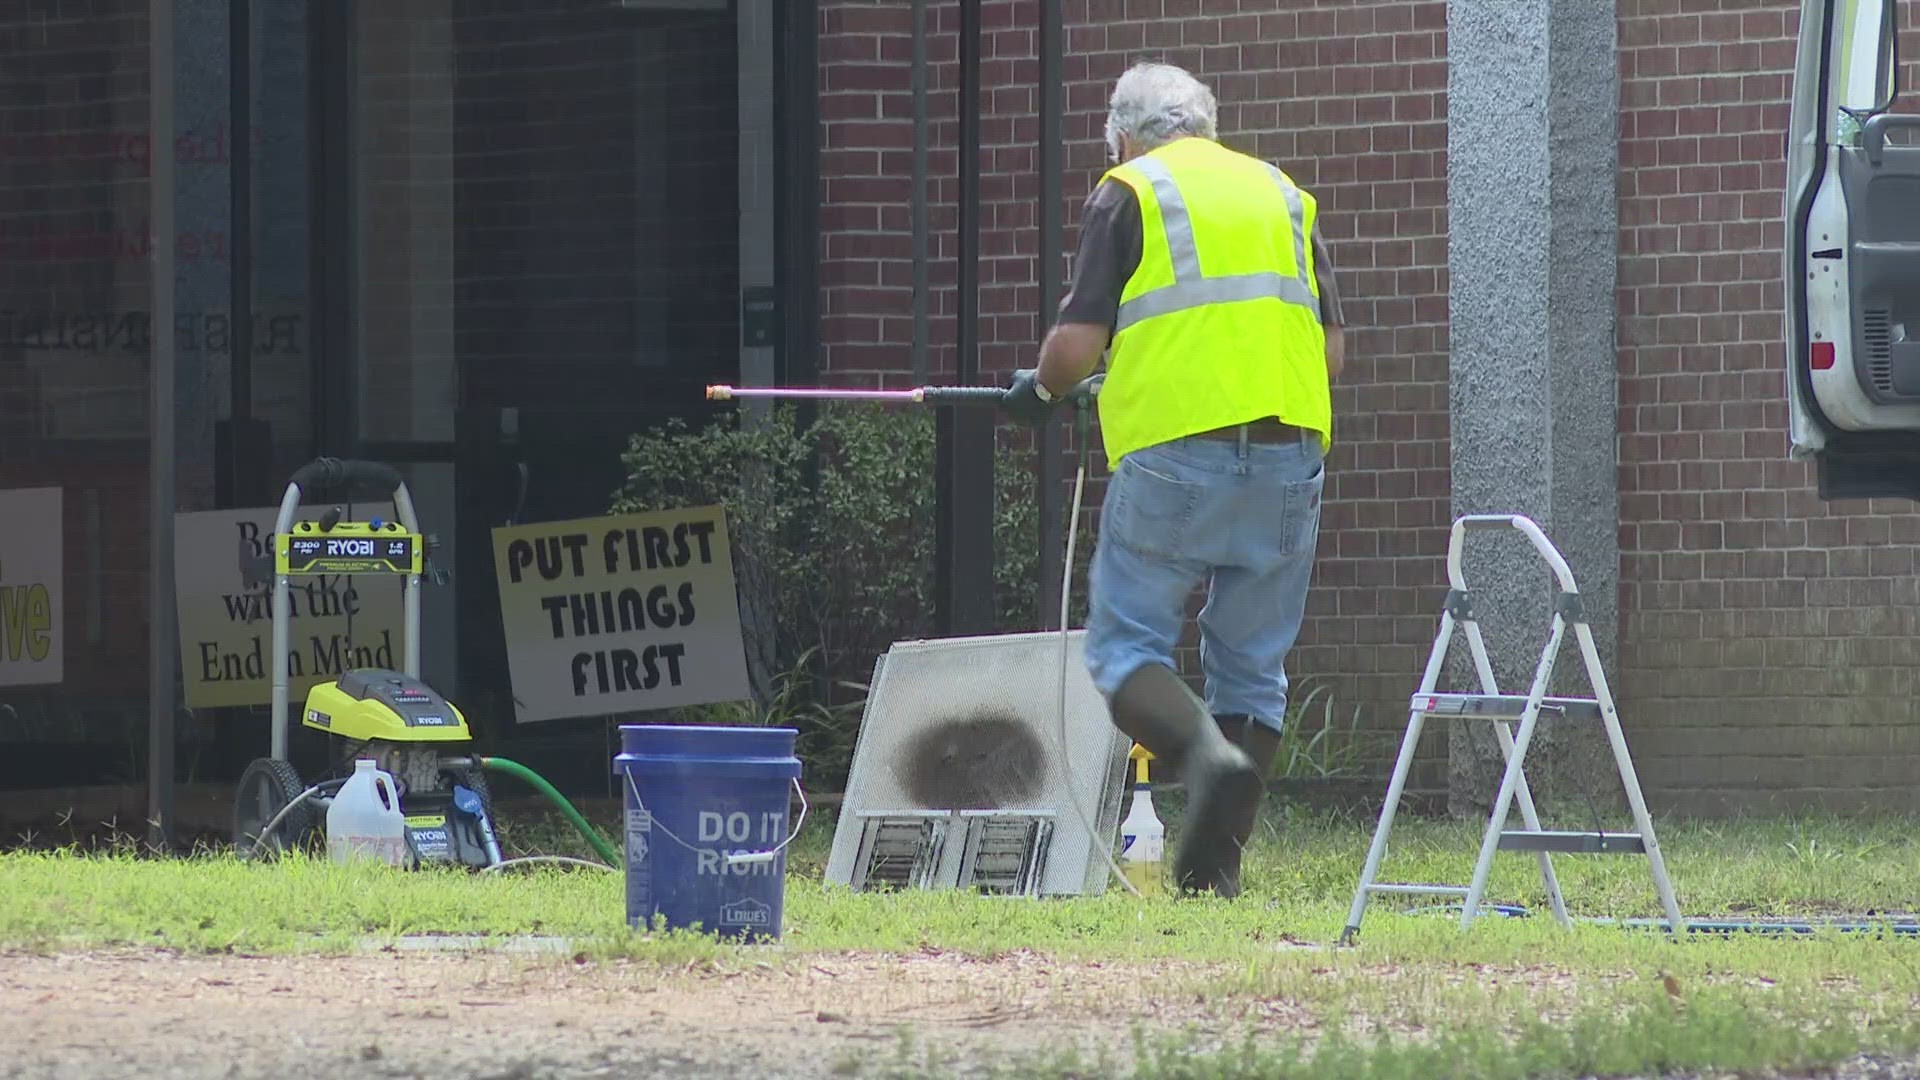 Mold was found in Andrews and Newlin Elementary Schools, according to district leaders. Experts weigh in on the cleanup timeline.